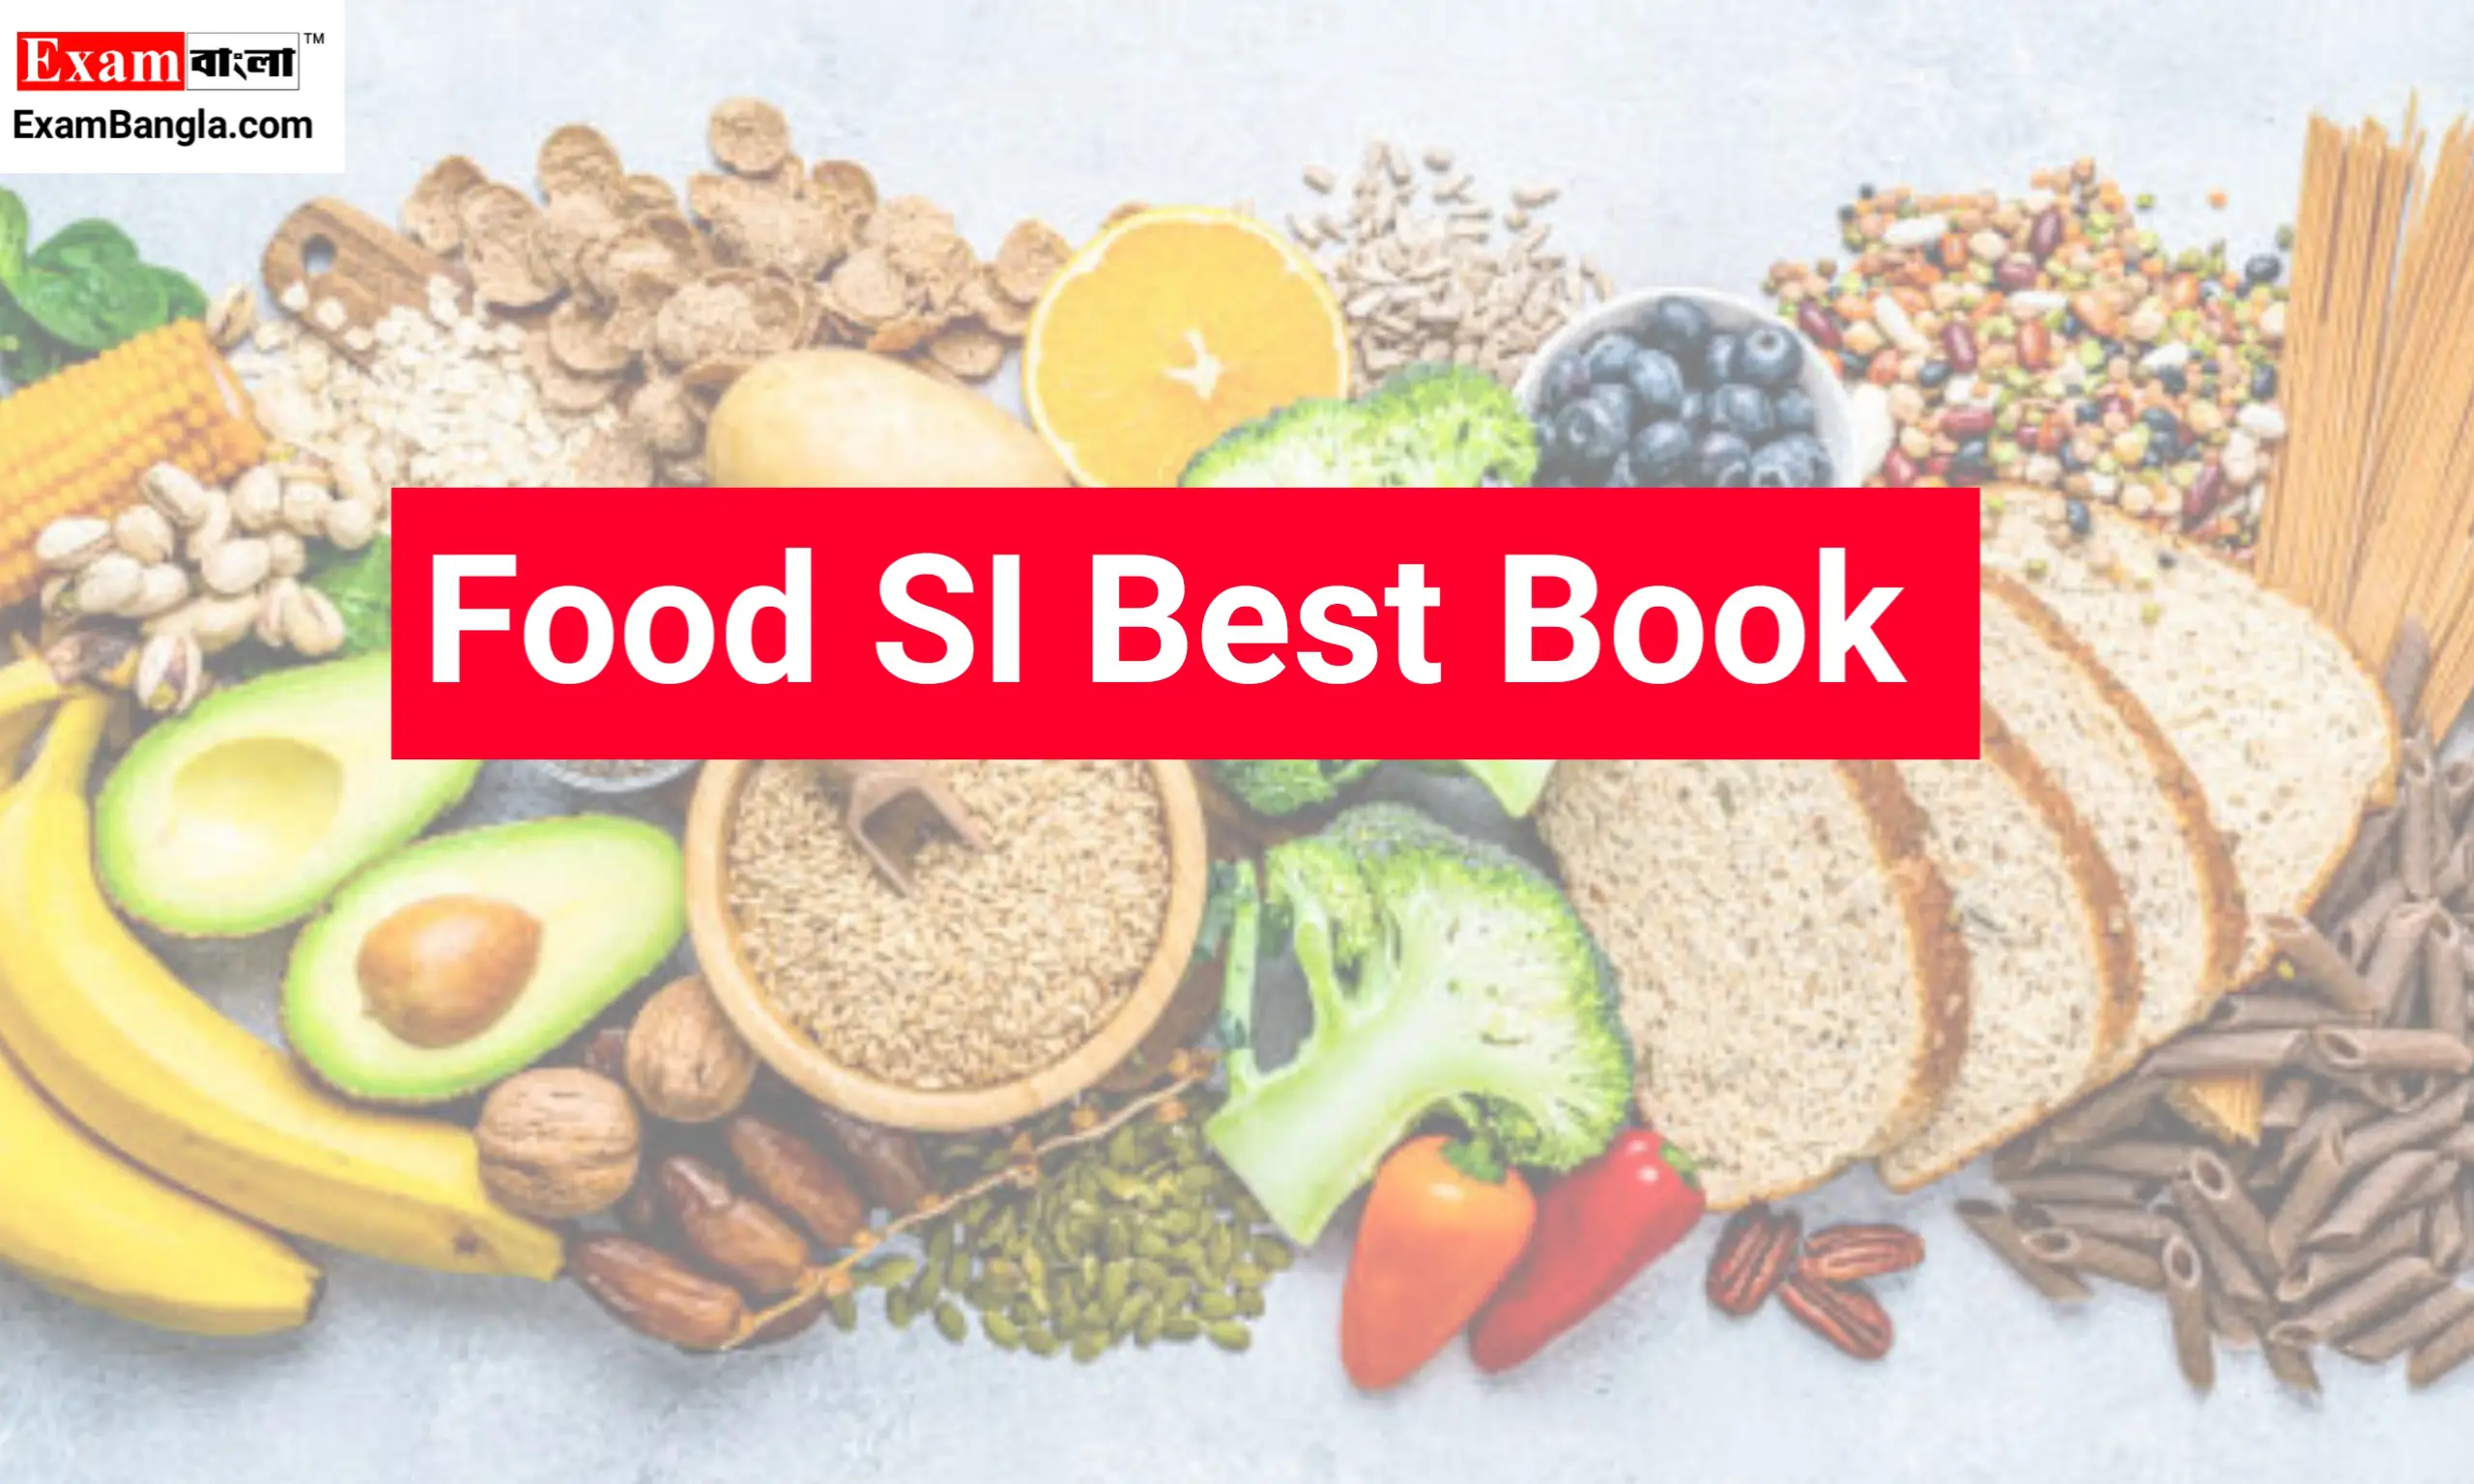 WBPSC Food SI Best Book